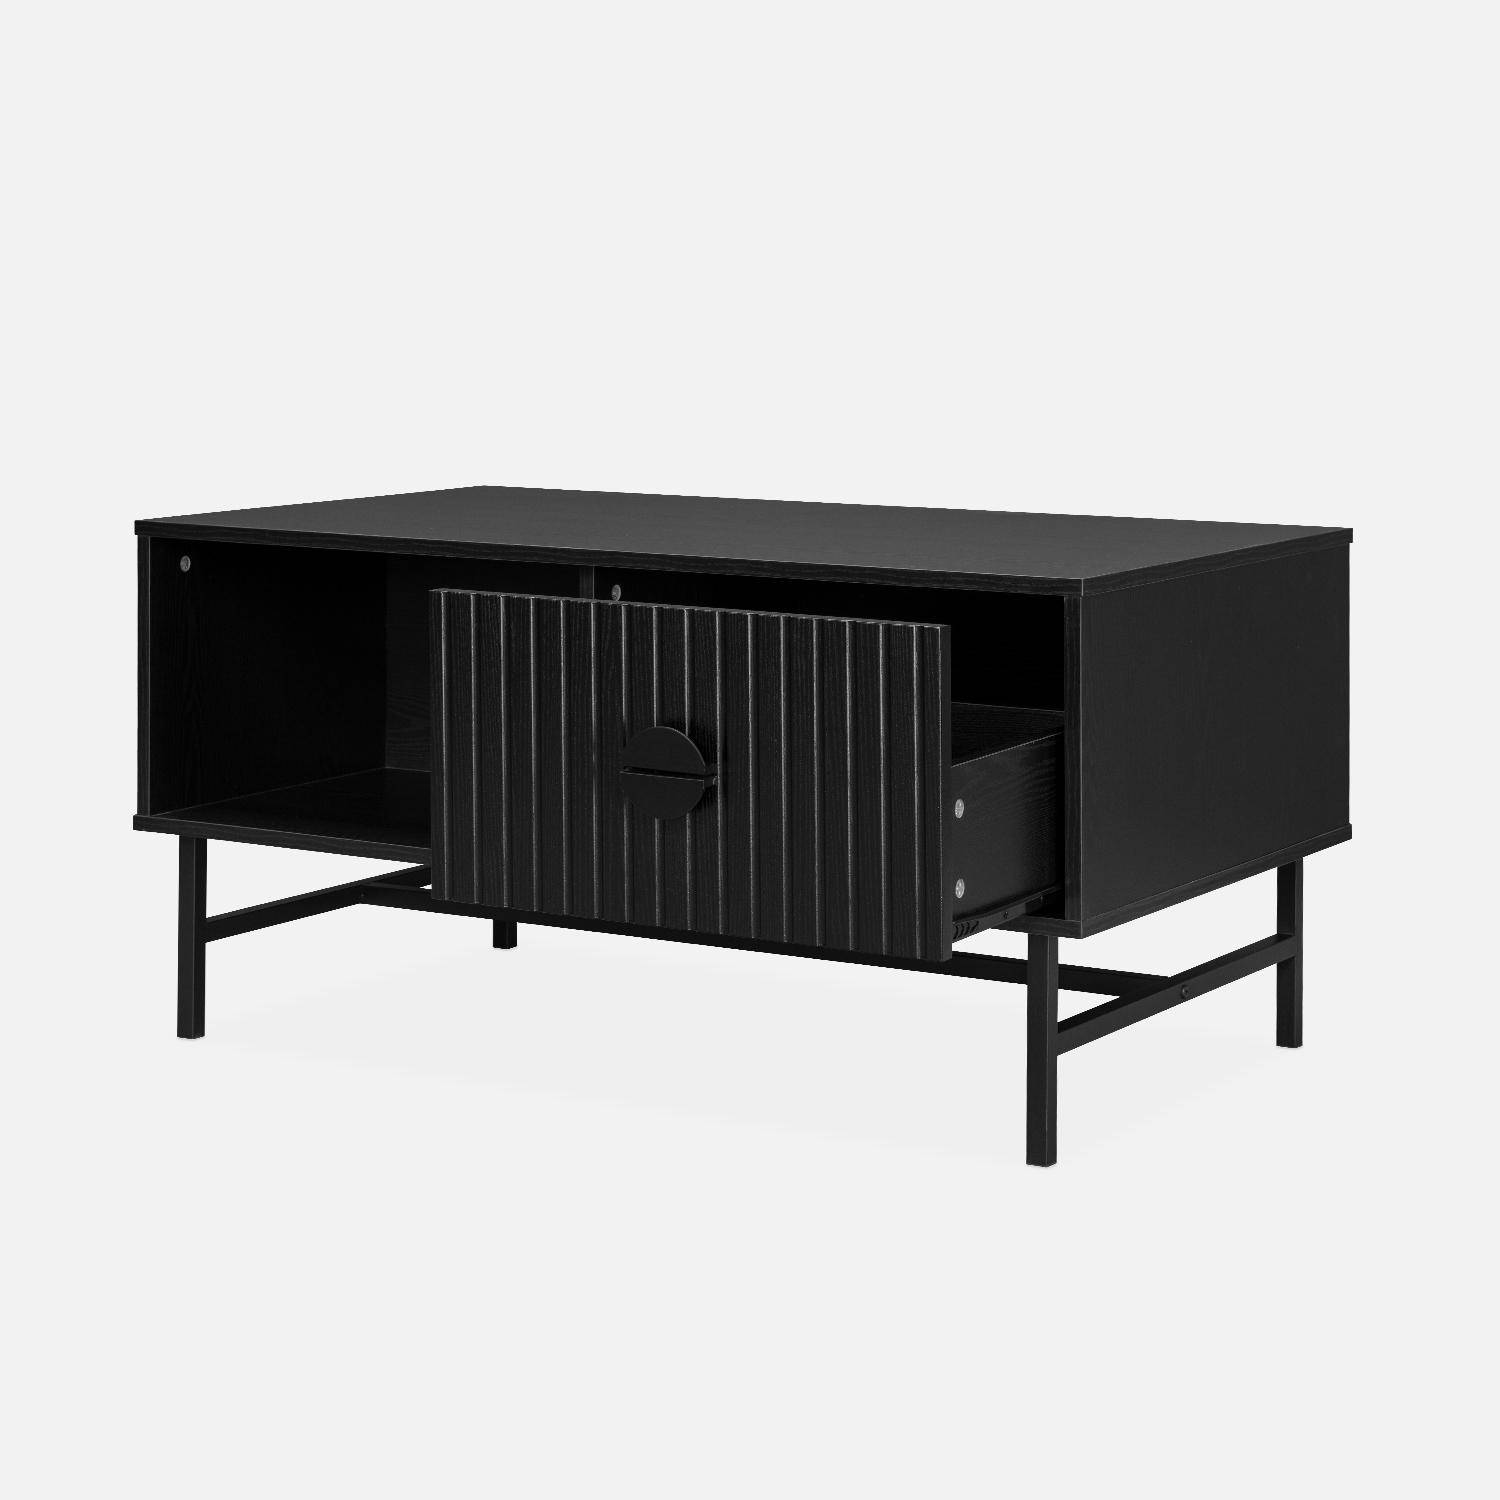 Coffee table with one drawer and one storage nook, ridged effect, industrial style, 100x59x50.2cm - Bazalt - Black Photo7